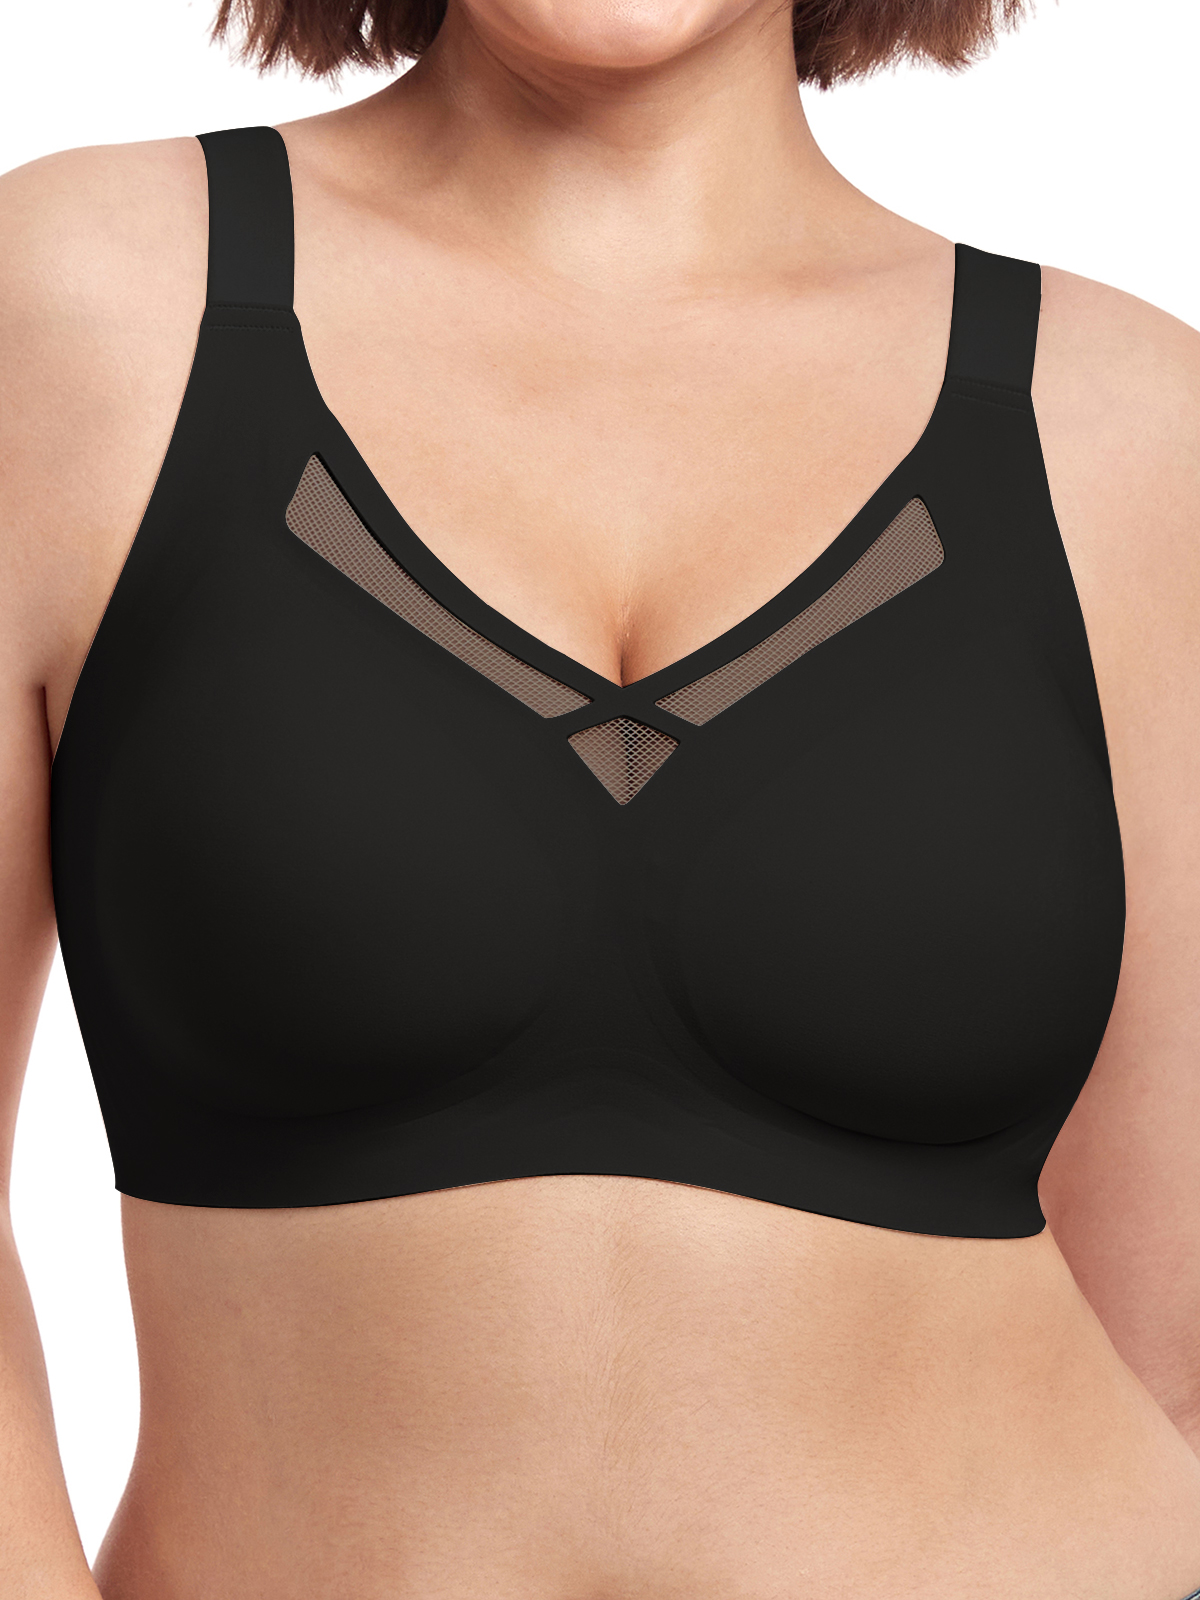 Brabalas Ultimate Comfort Bra for Women, Silky Smooth Bralettes T